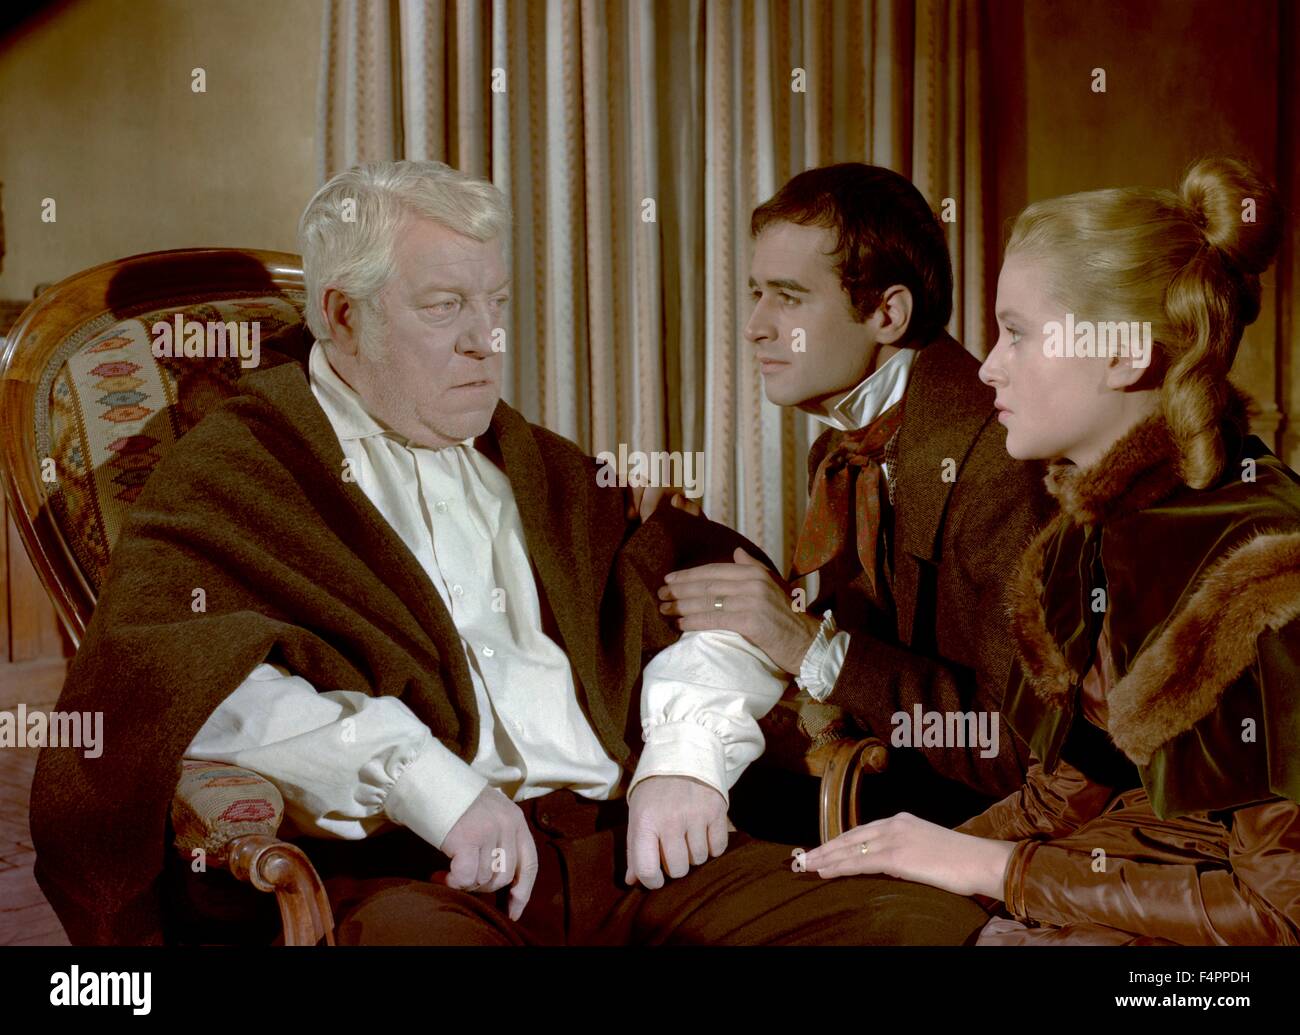 Jean Gabin, Gianni Esposito and Beatrice Altariba / Les miserables / 1957 directed by Jean-Paul Le Chanois Stock Photo